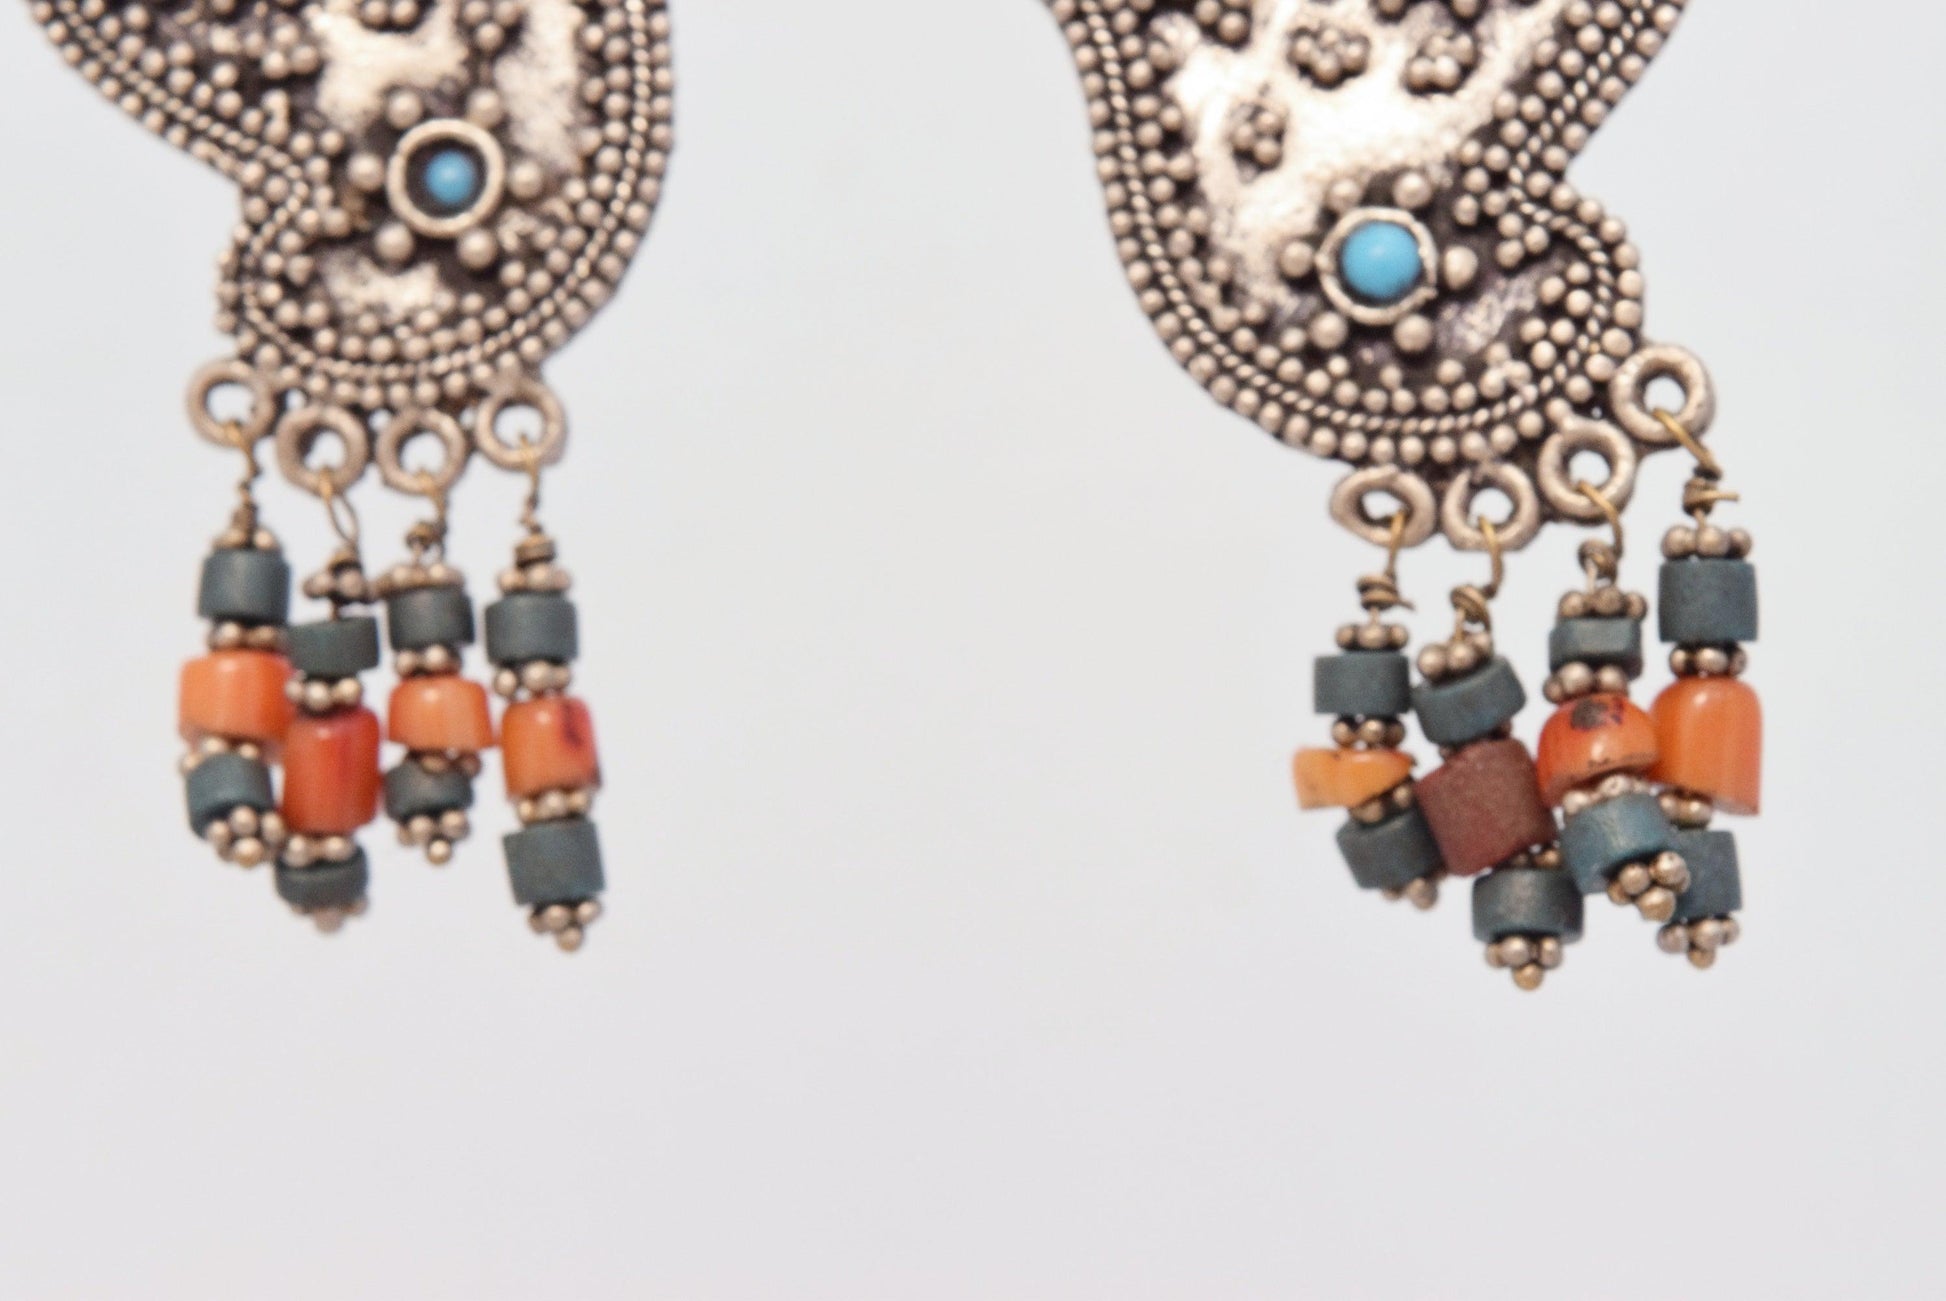 Vintage Afghani Uzbek Style Silver Bird Earrings with turquoise and coral - Anteeka